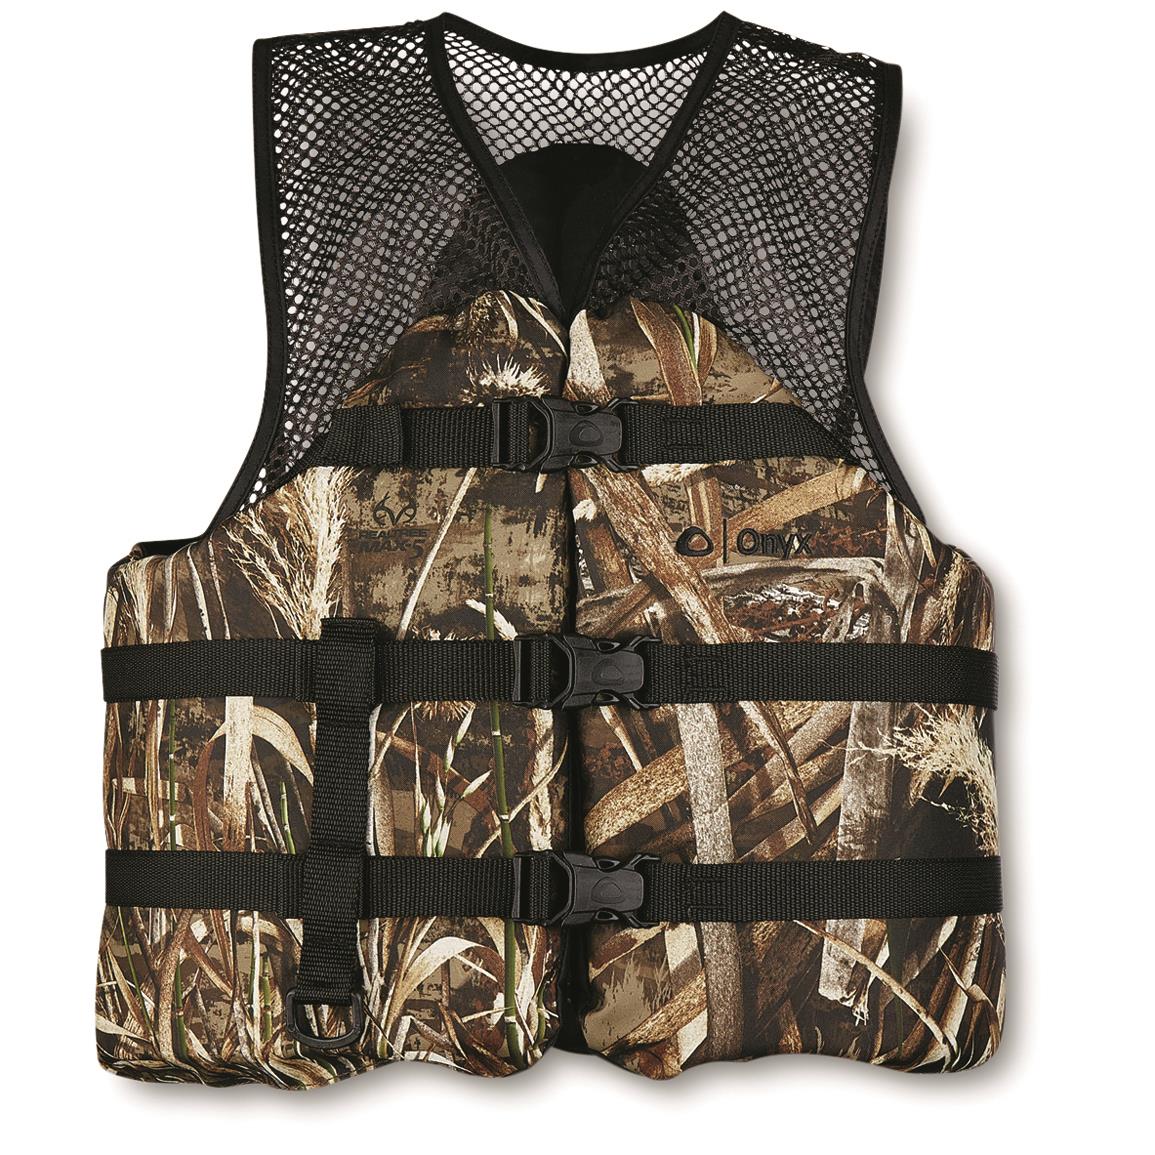 Onyx Adult Sports Life Vest in Realtree Max-5 Camo